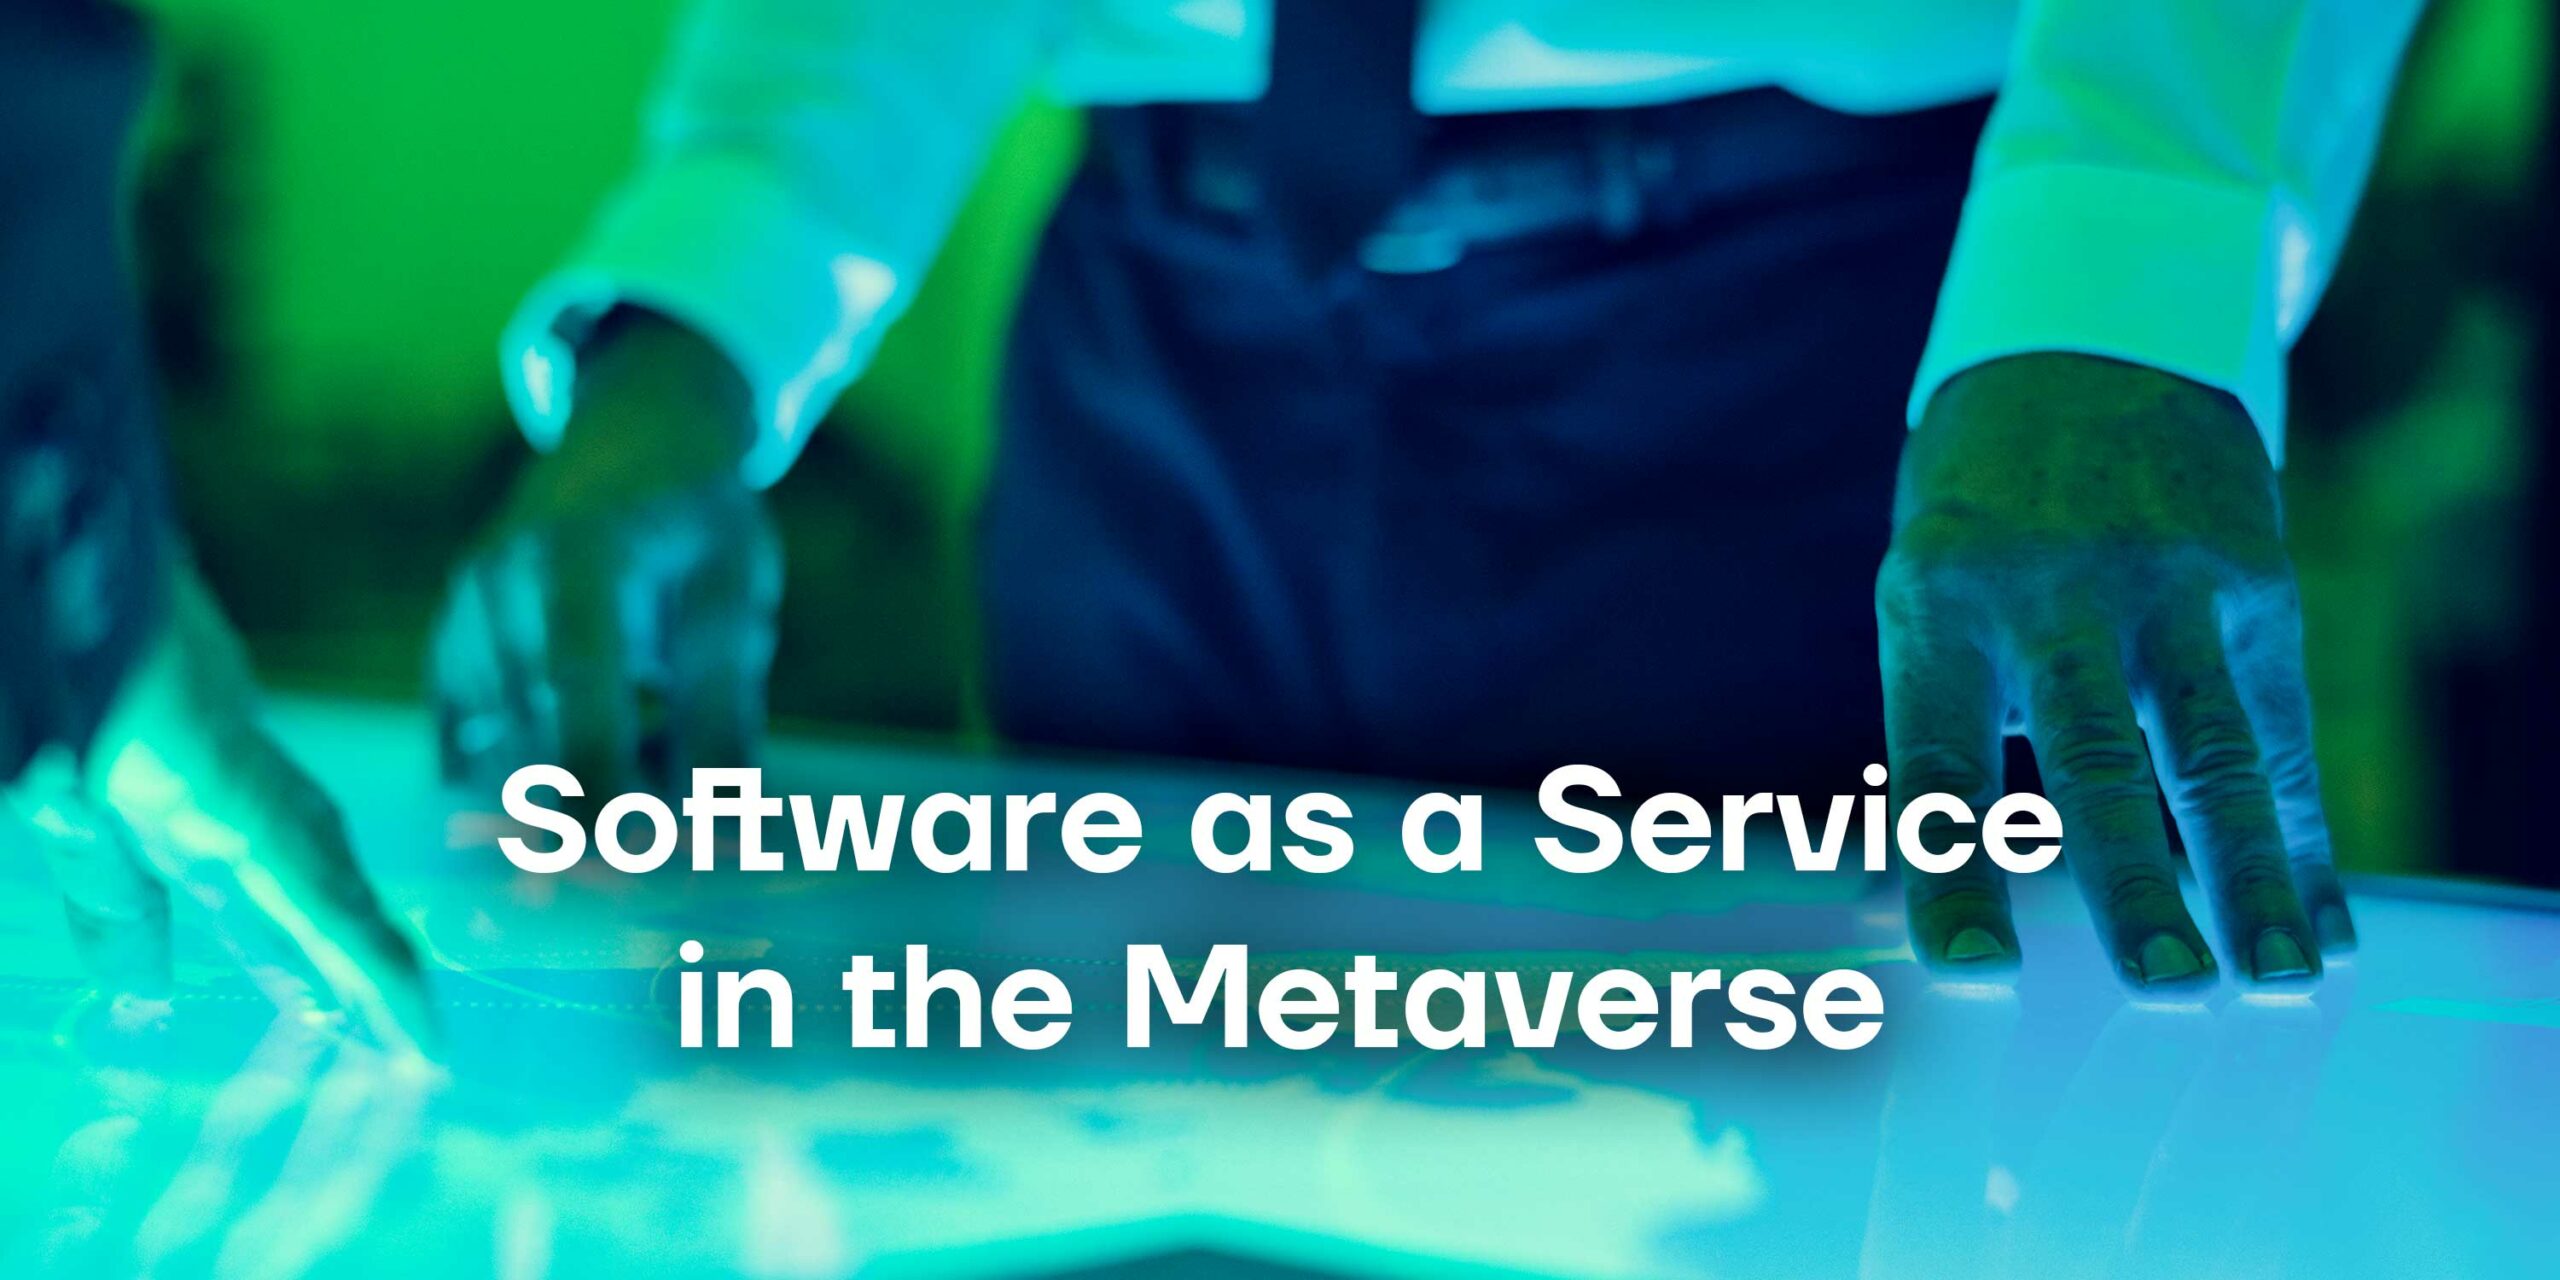 Software in the Metaverse